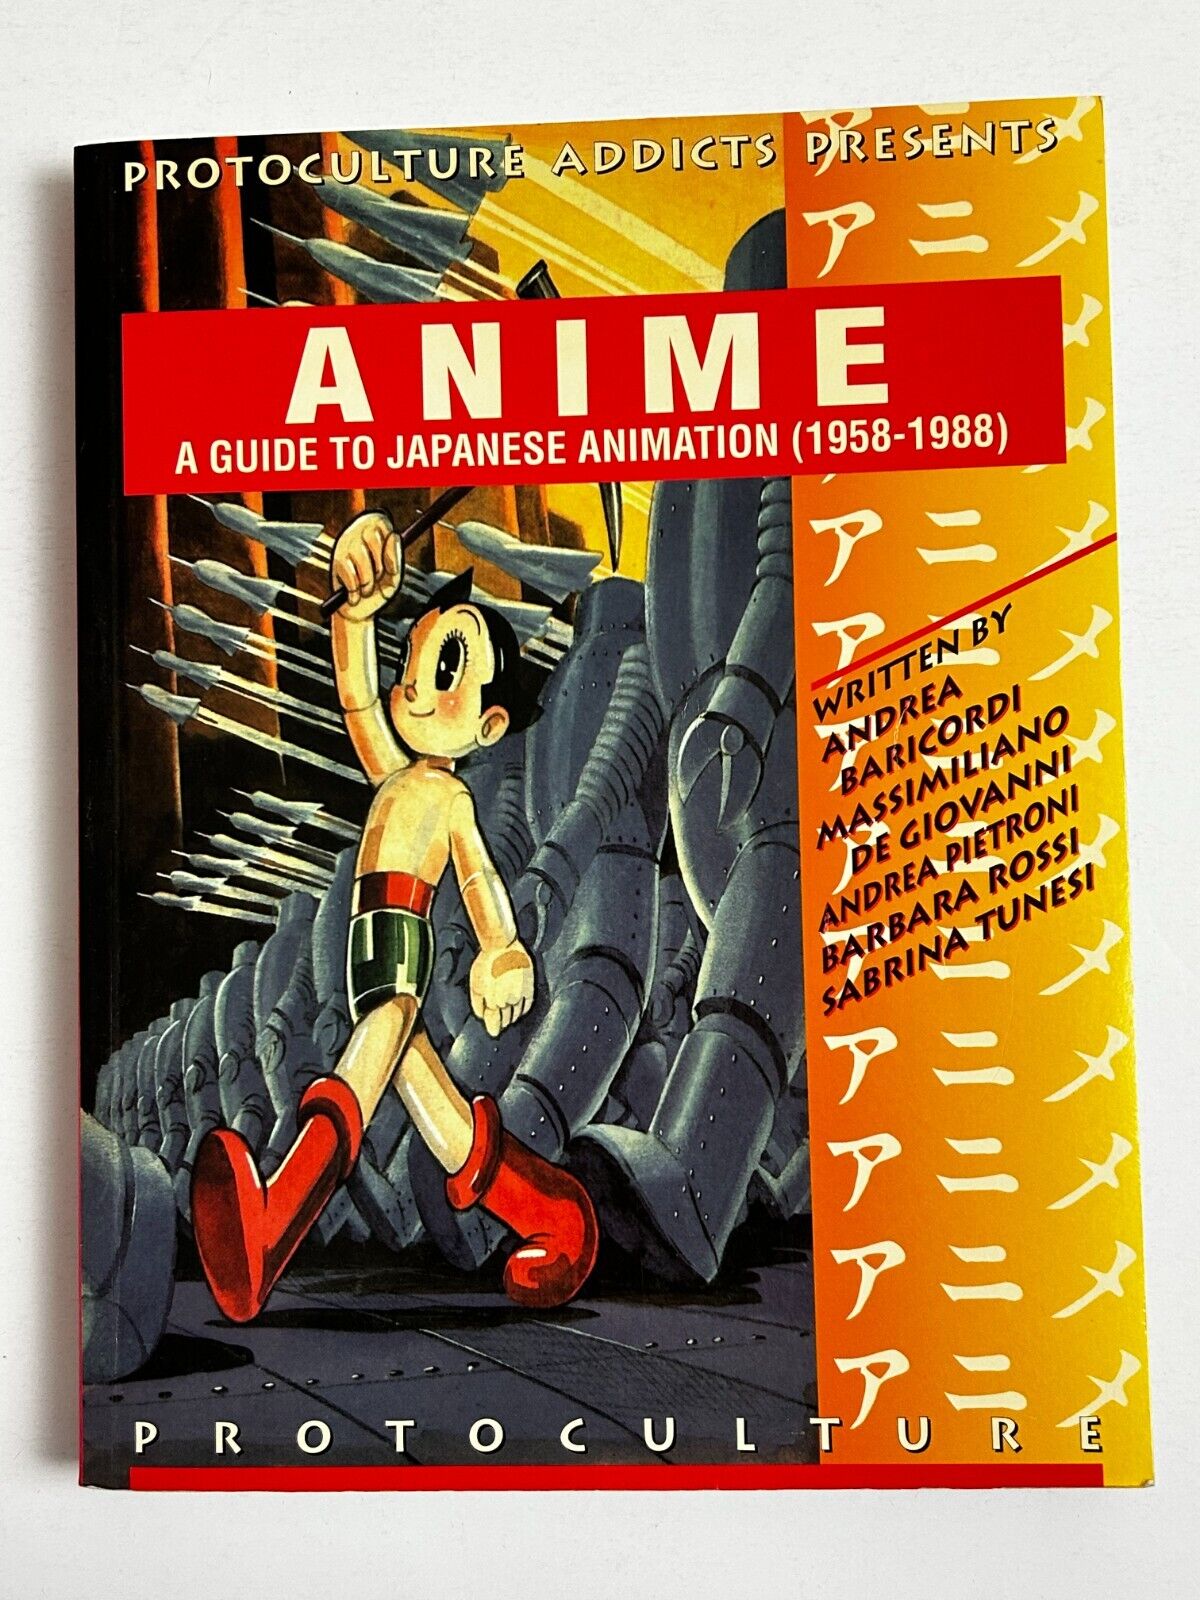 ANIME A Guide To Japanese Animation Protoculture Addicts Reference Book Tezuka